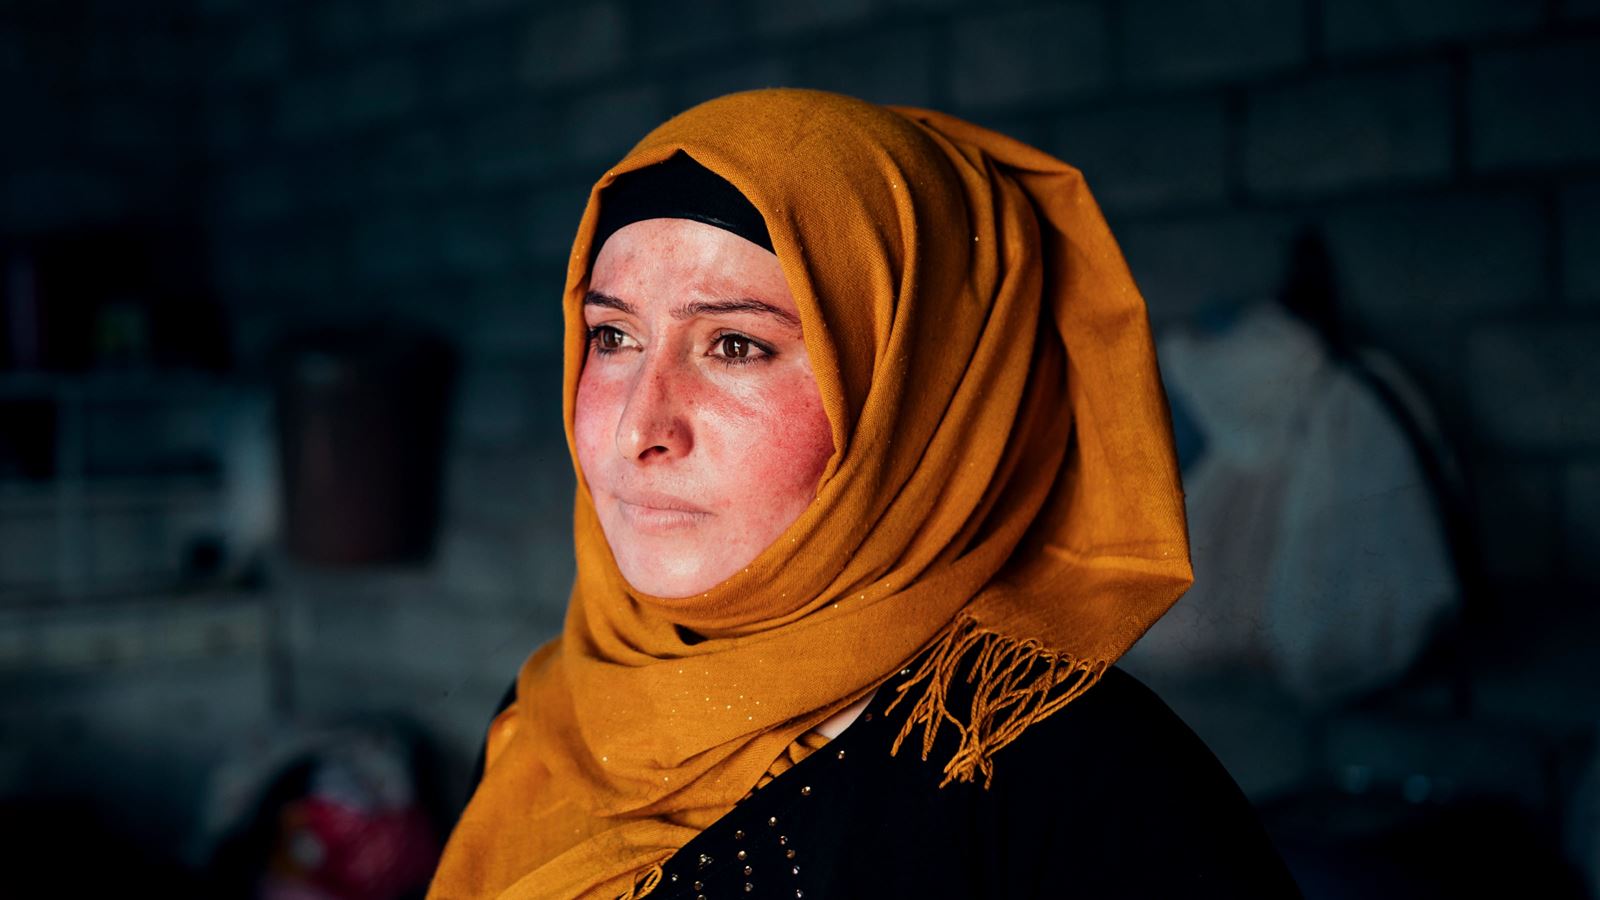 Aya shares her story of fleeing violence in her village in Iraq, and returning to rebuild her dreams.